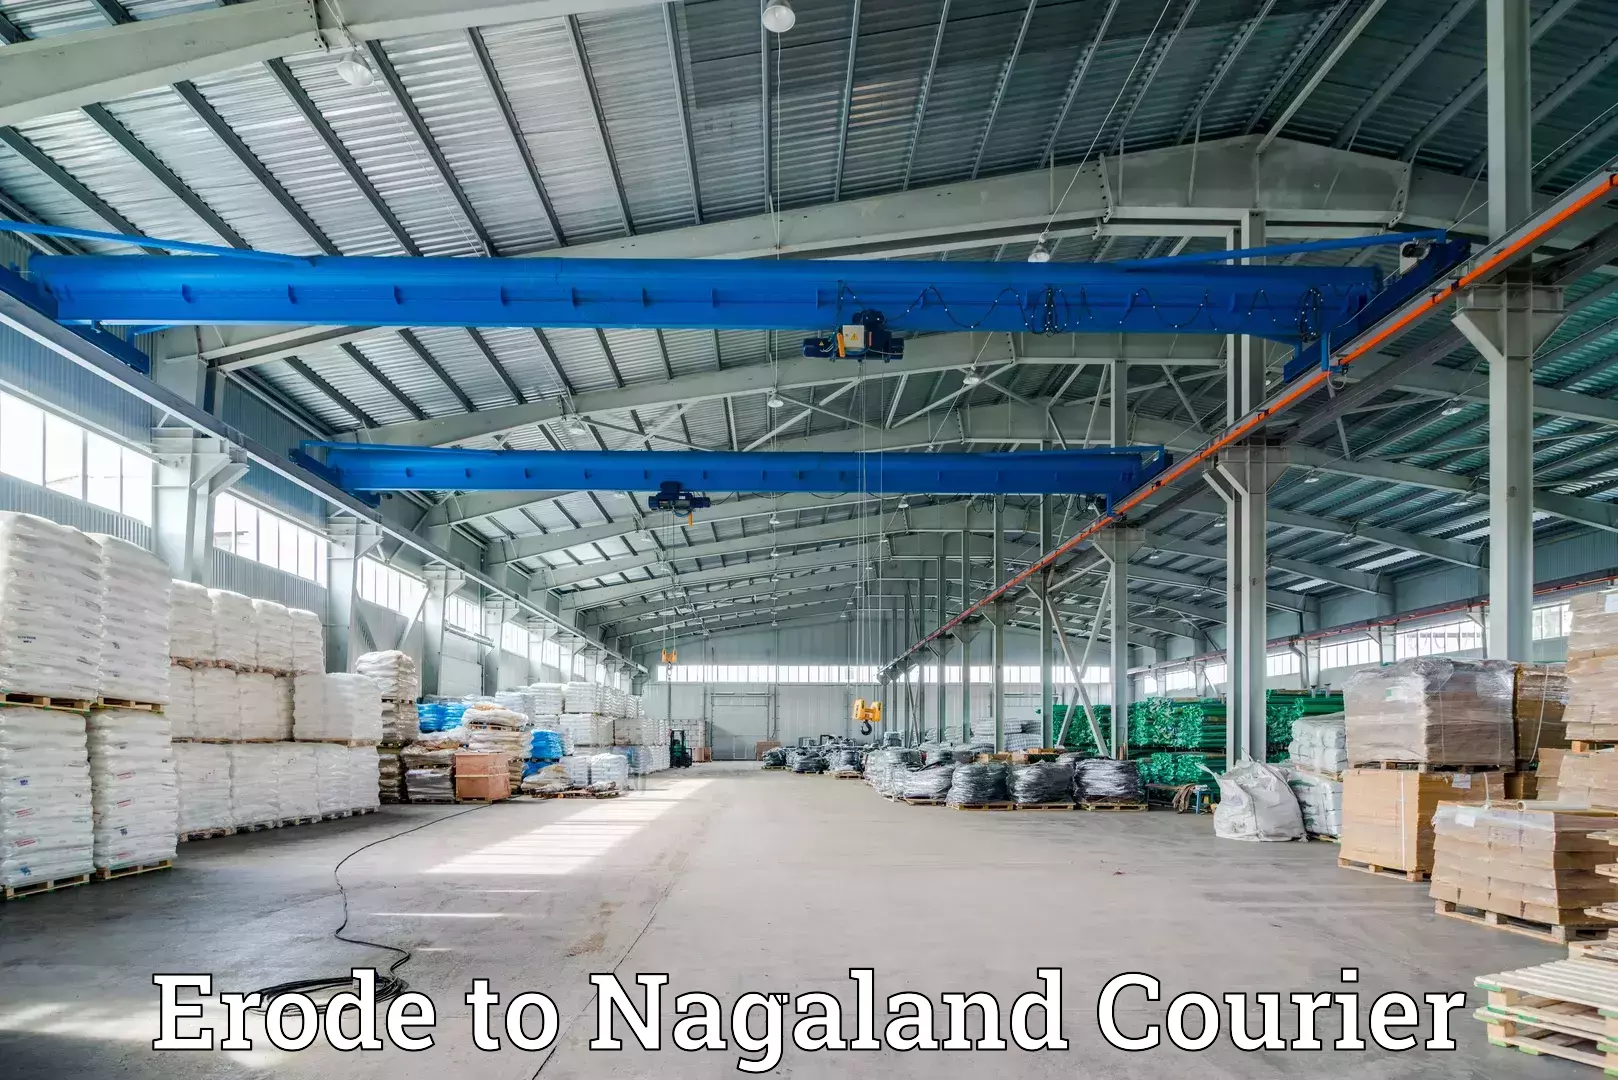 Customizable delivery plans Erode to Nagaland